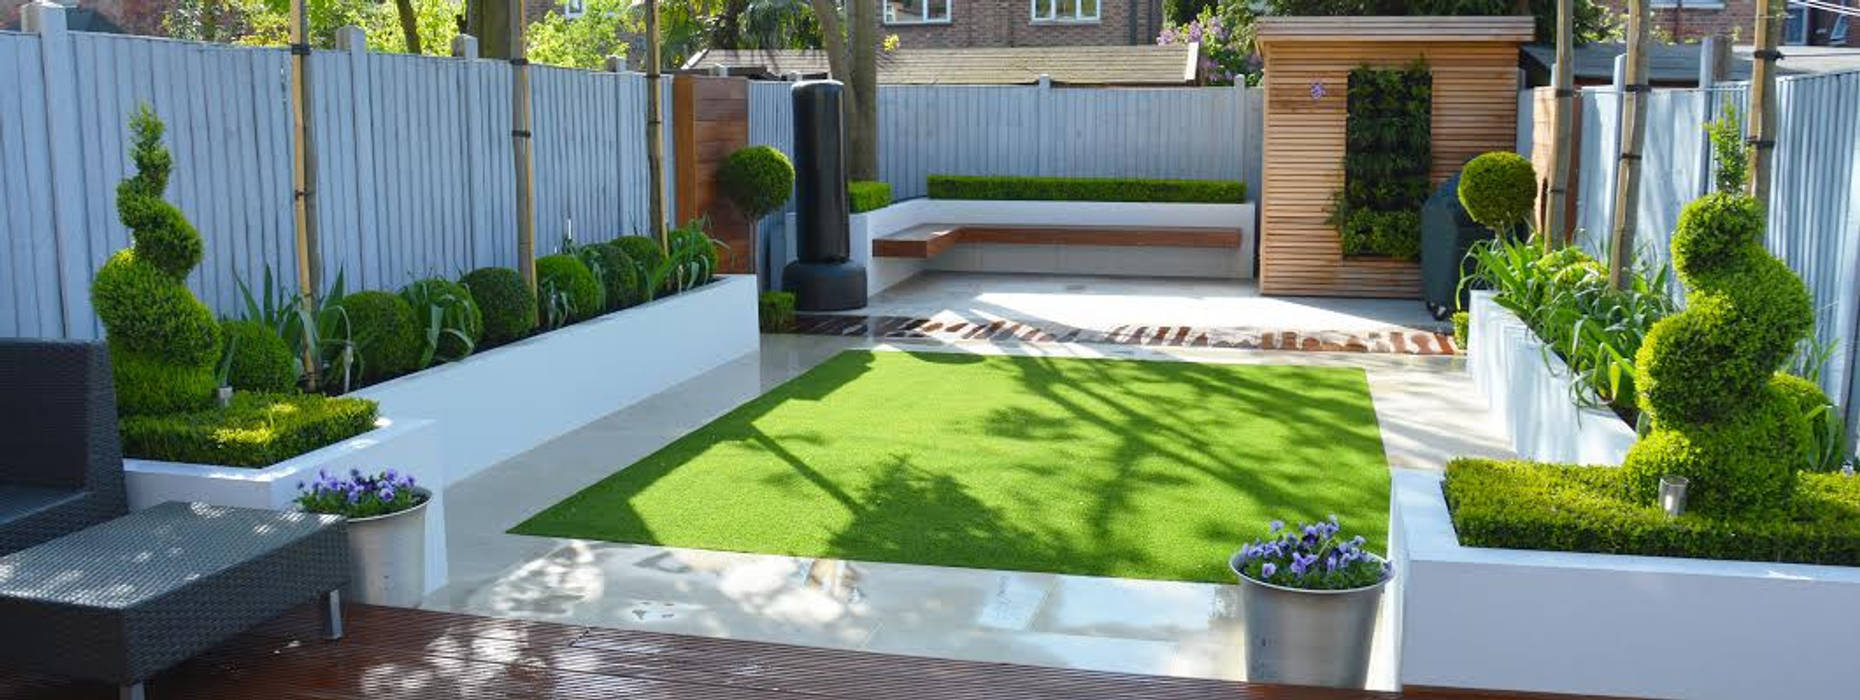 Minimalist Garden: Amazing relaxing space that you will fall in love with, Landscaper in London Landscaper in London Nowoczesny ogród